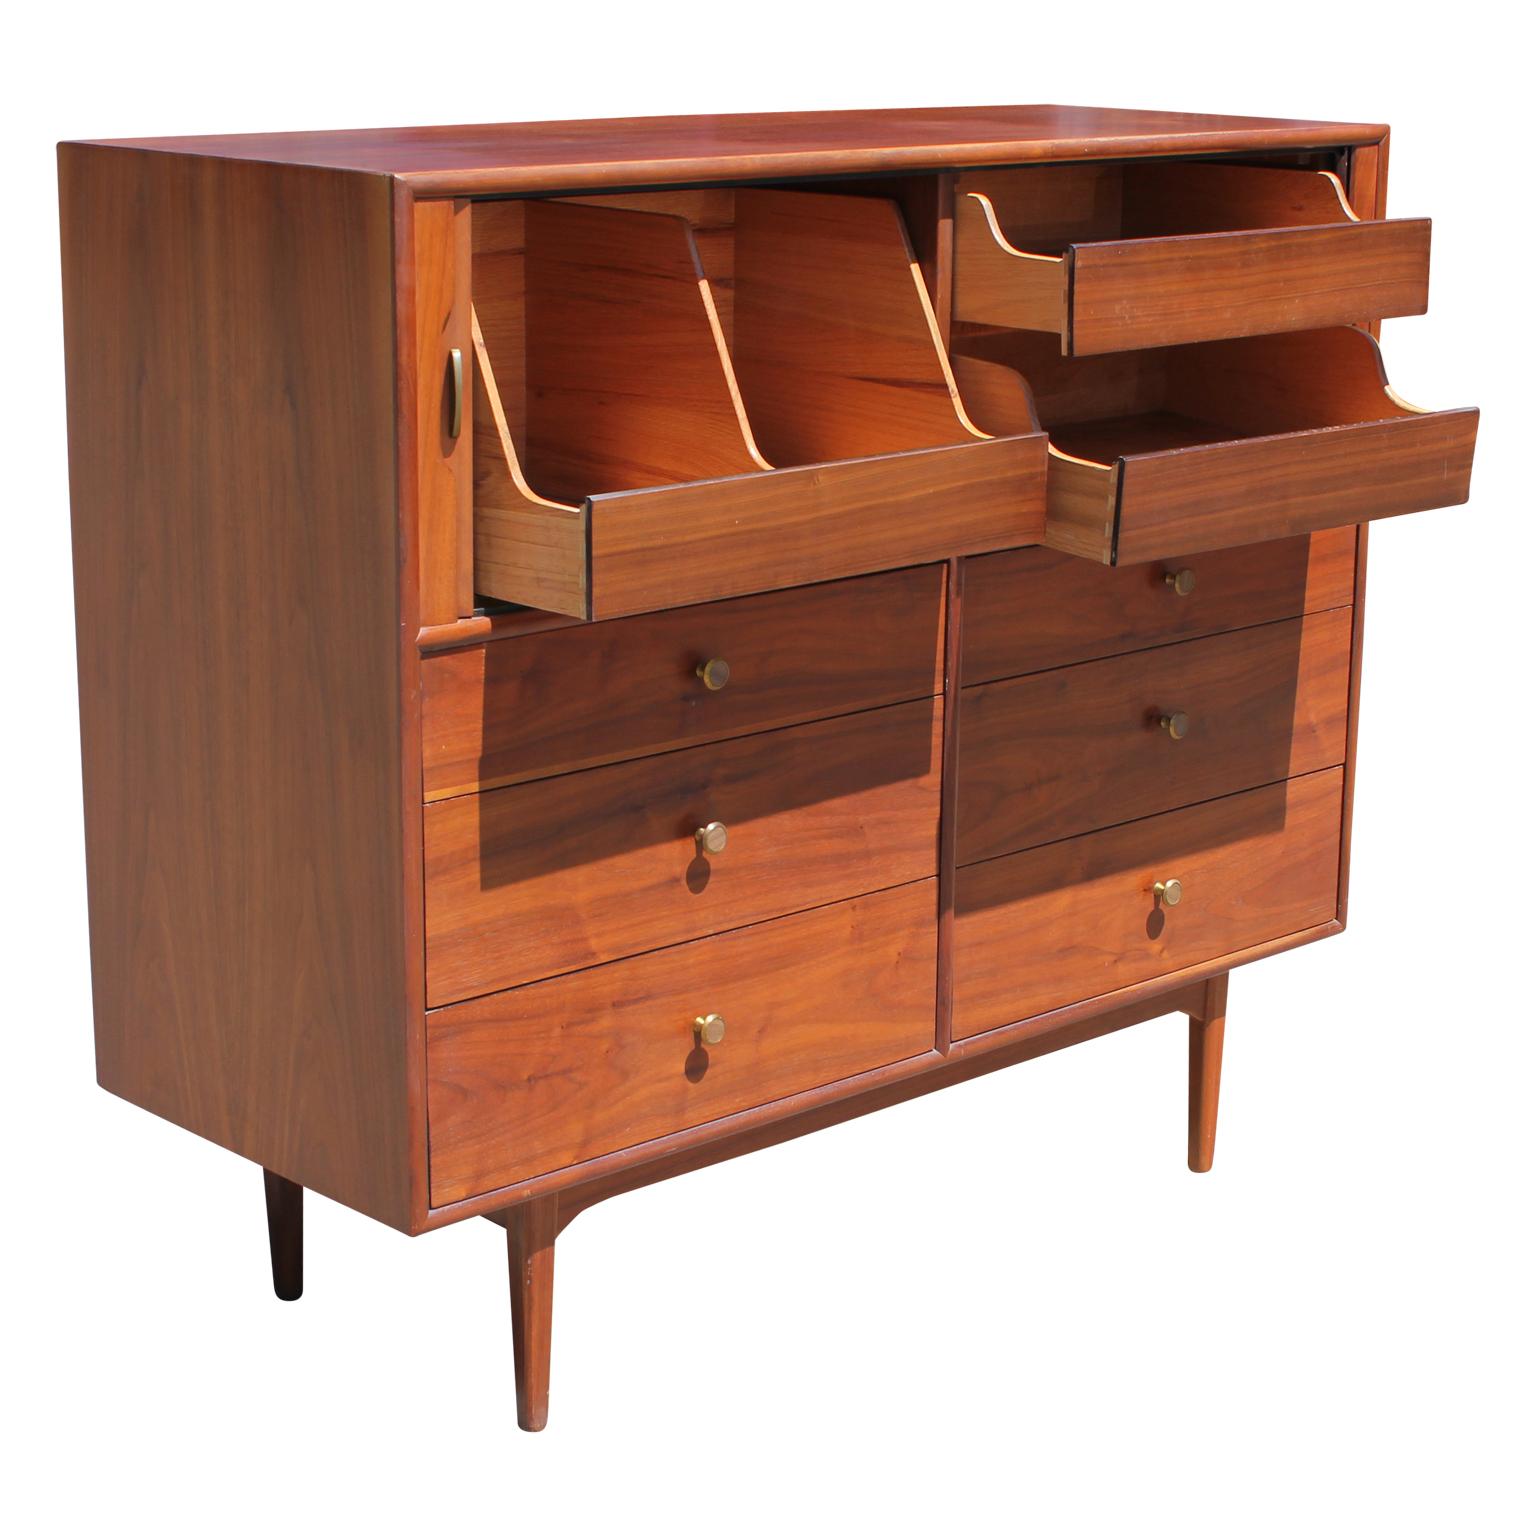 Fabulous Mid-Century Modern wood dresser or gentleman's chest with tambour doors on the front by Kipp Stewart for the Dexel Declaration line. There are storage shelves that slide out when the tambour doors slide open. It has 6 front drawers, two